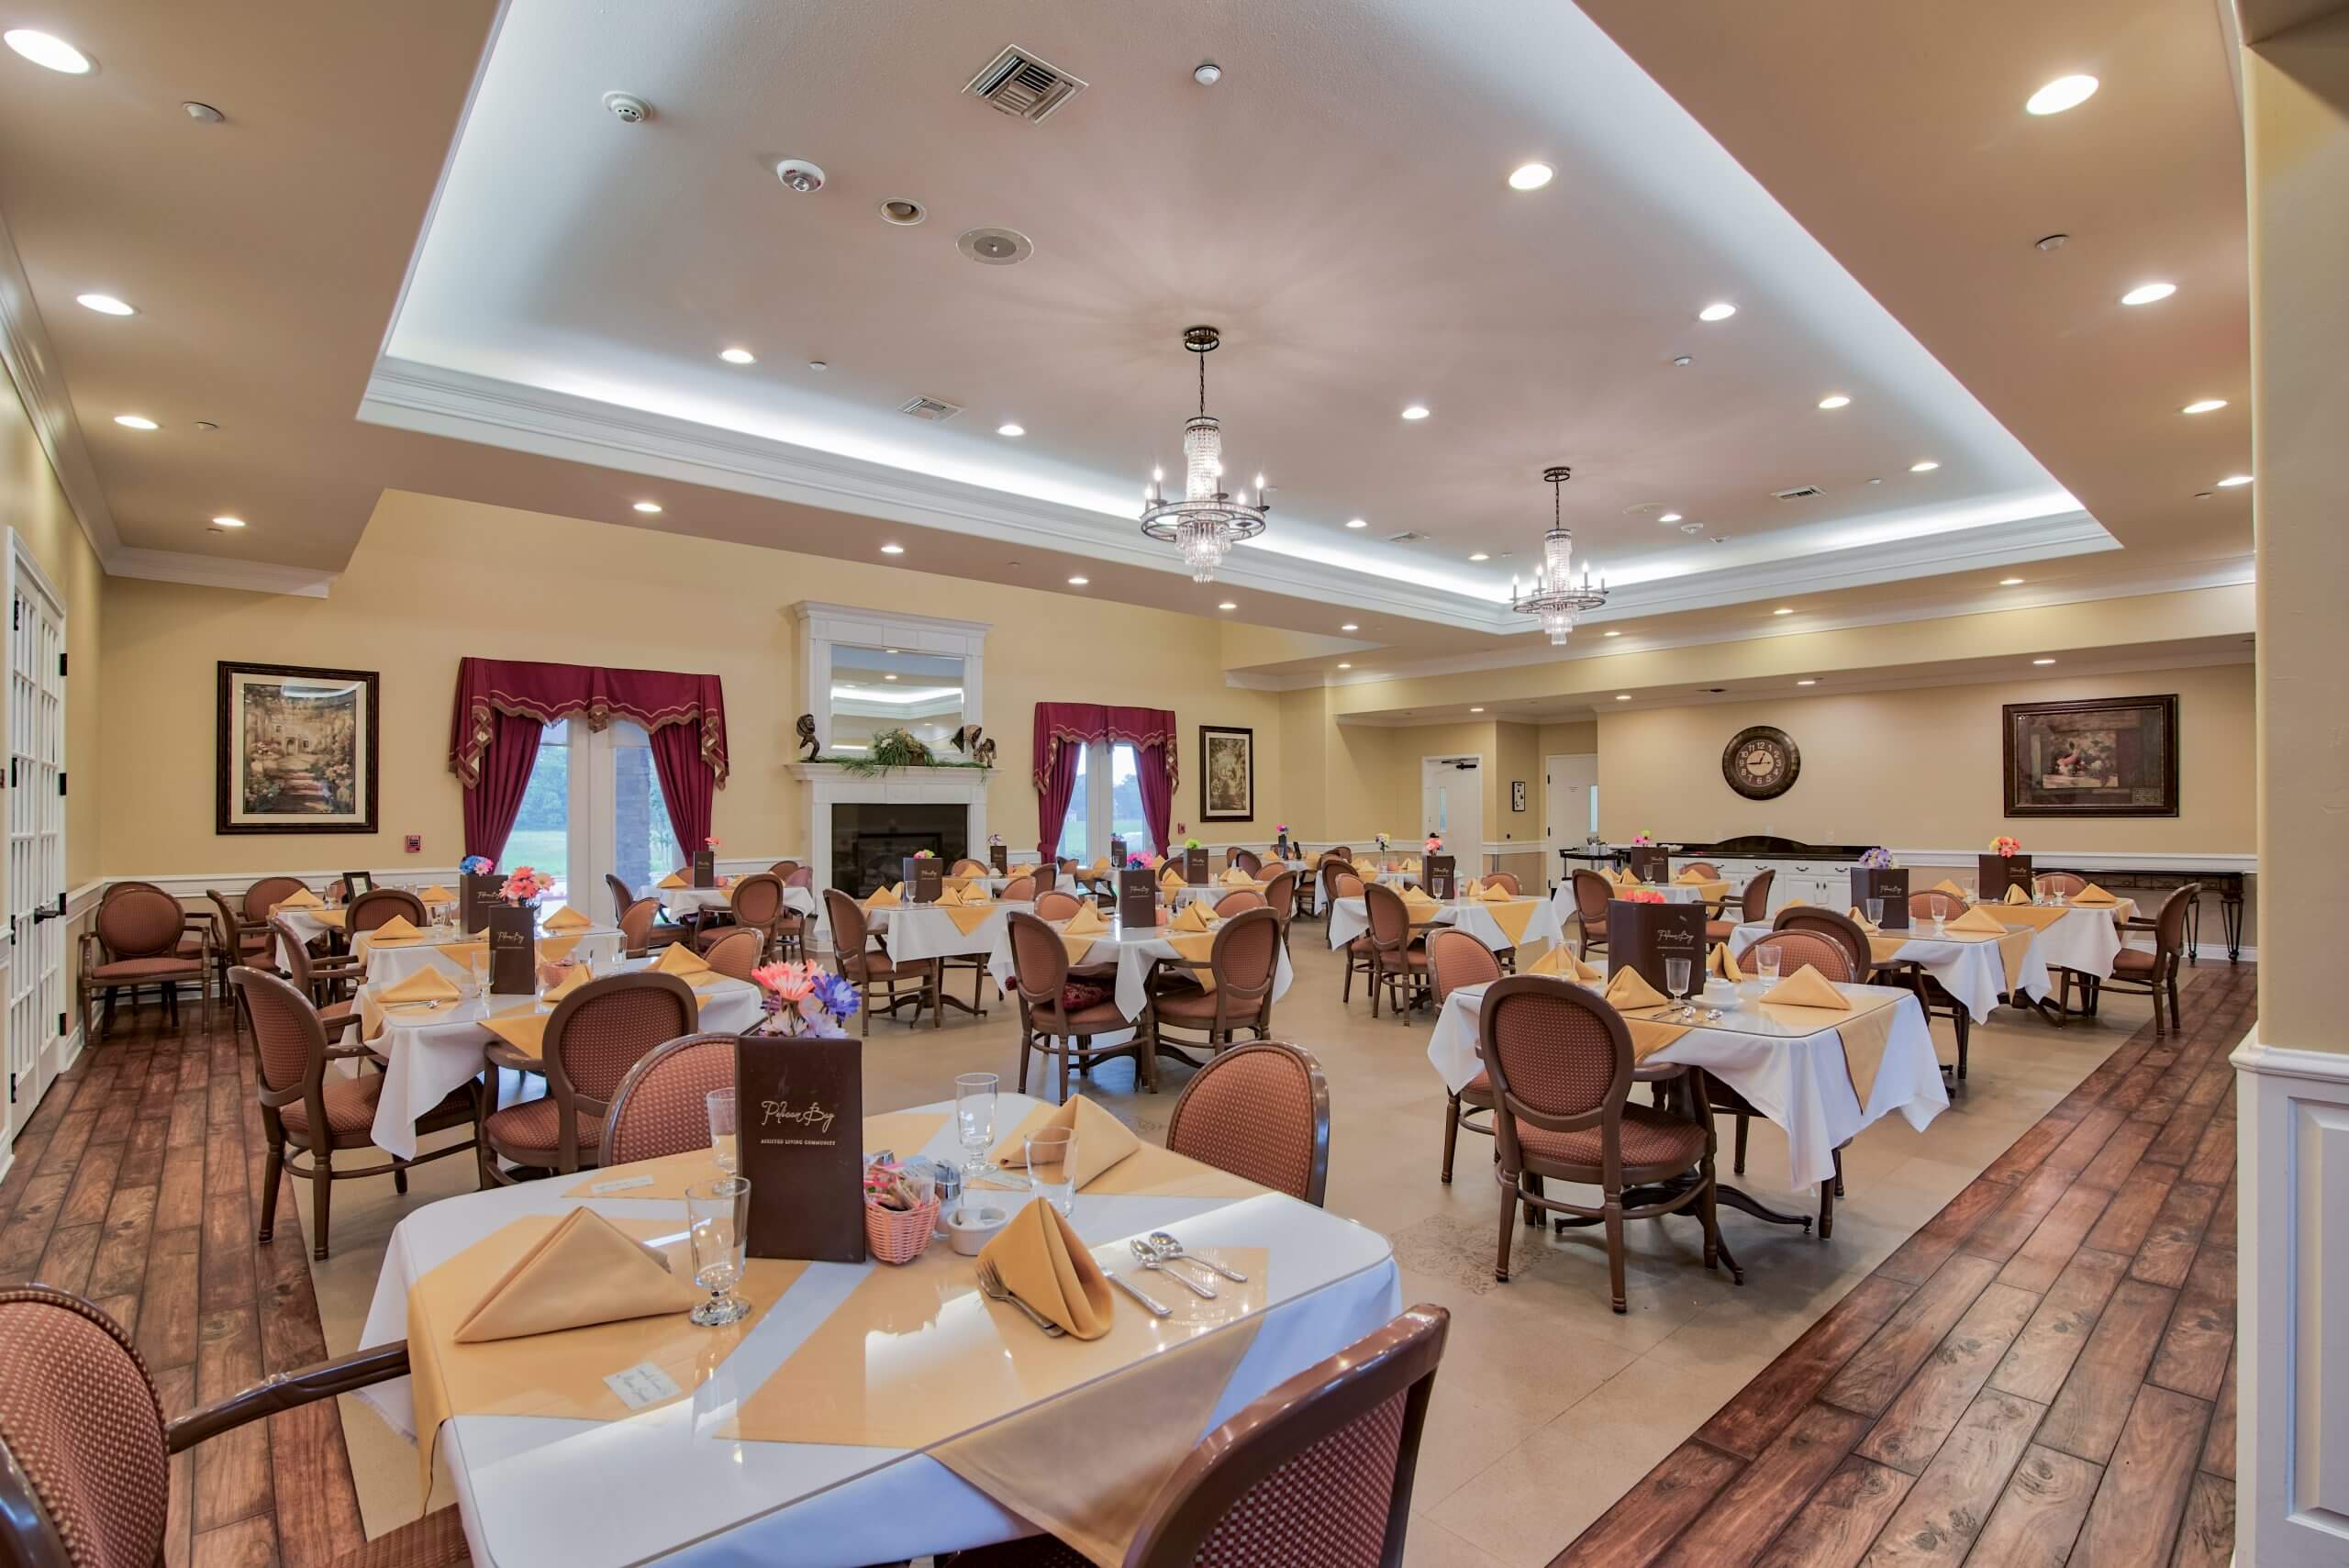 Dining area at Pelican Bay Assisted Living and memory care community in Beaumont, TX